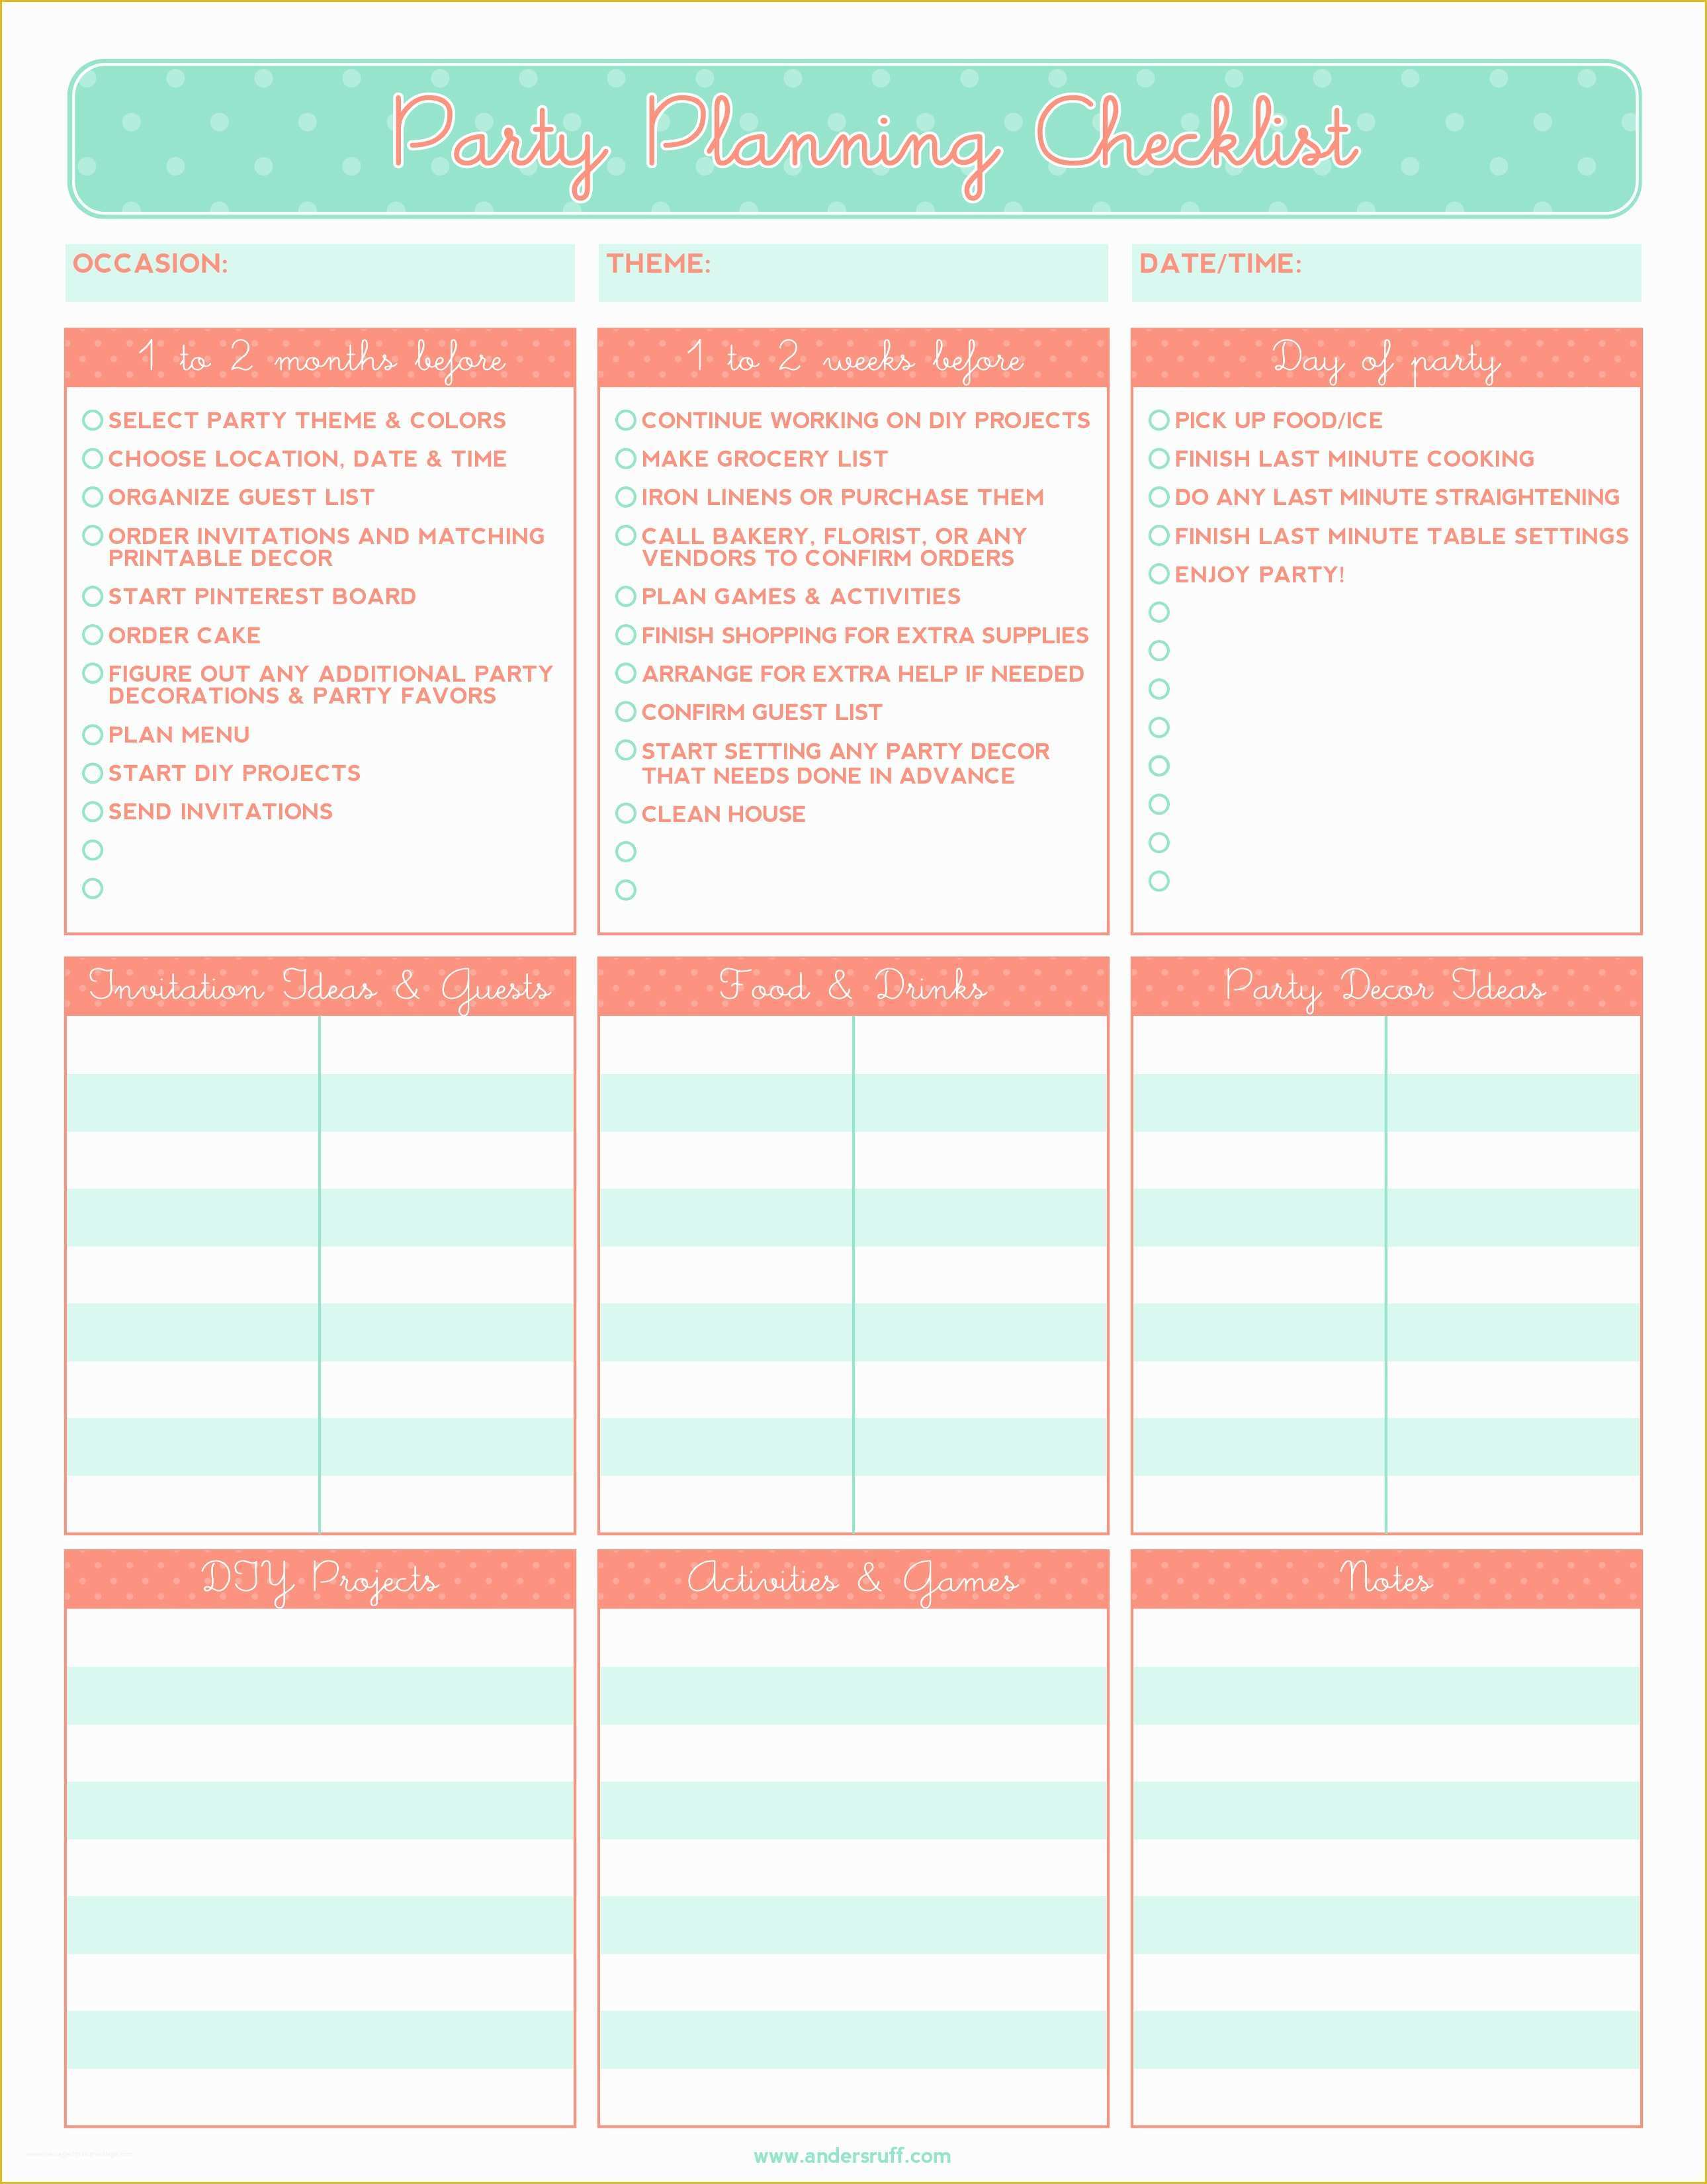 Event Planning Schedule Template Free Of 5 Party Planning Templates Excel Xlts